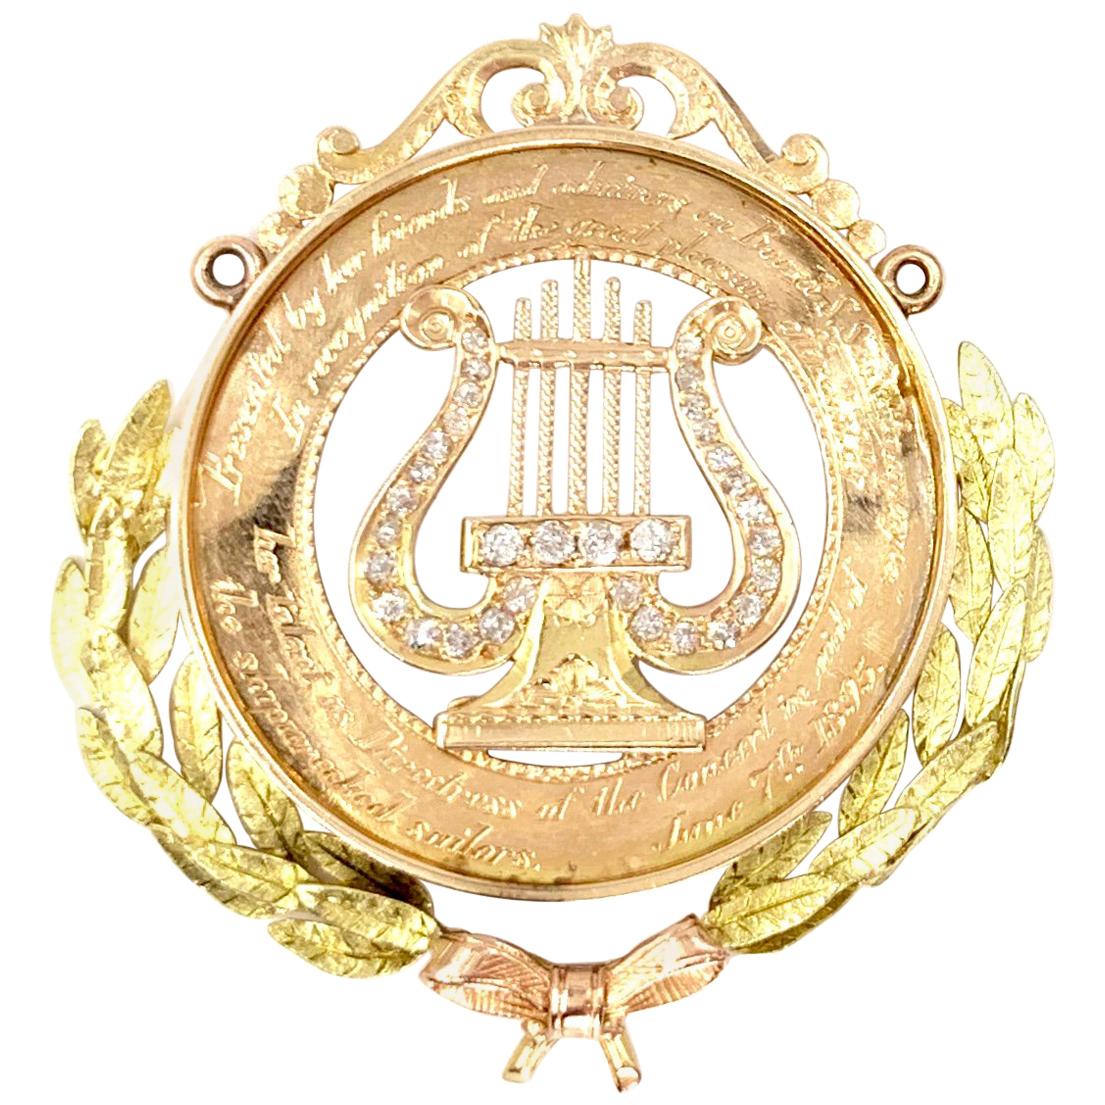 Rose and Yellow Gold Diamond Antique Musical Medallion Pendant